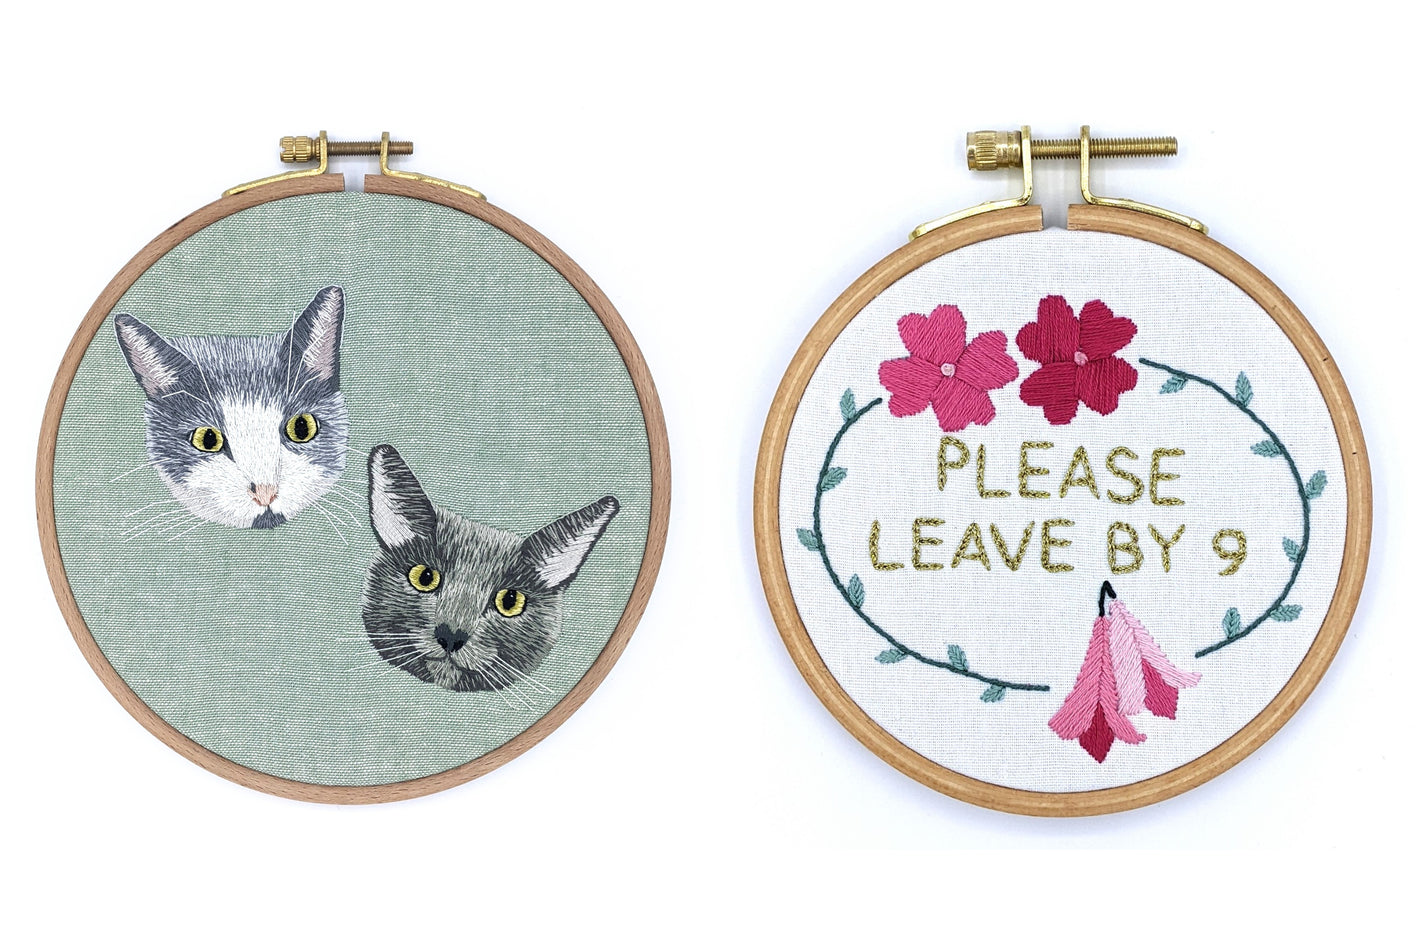 Two embroidery commissions